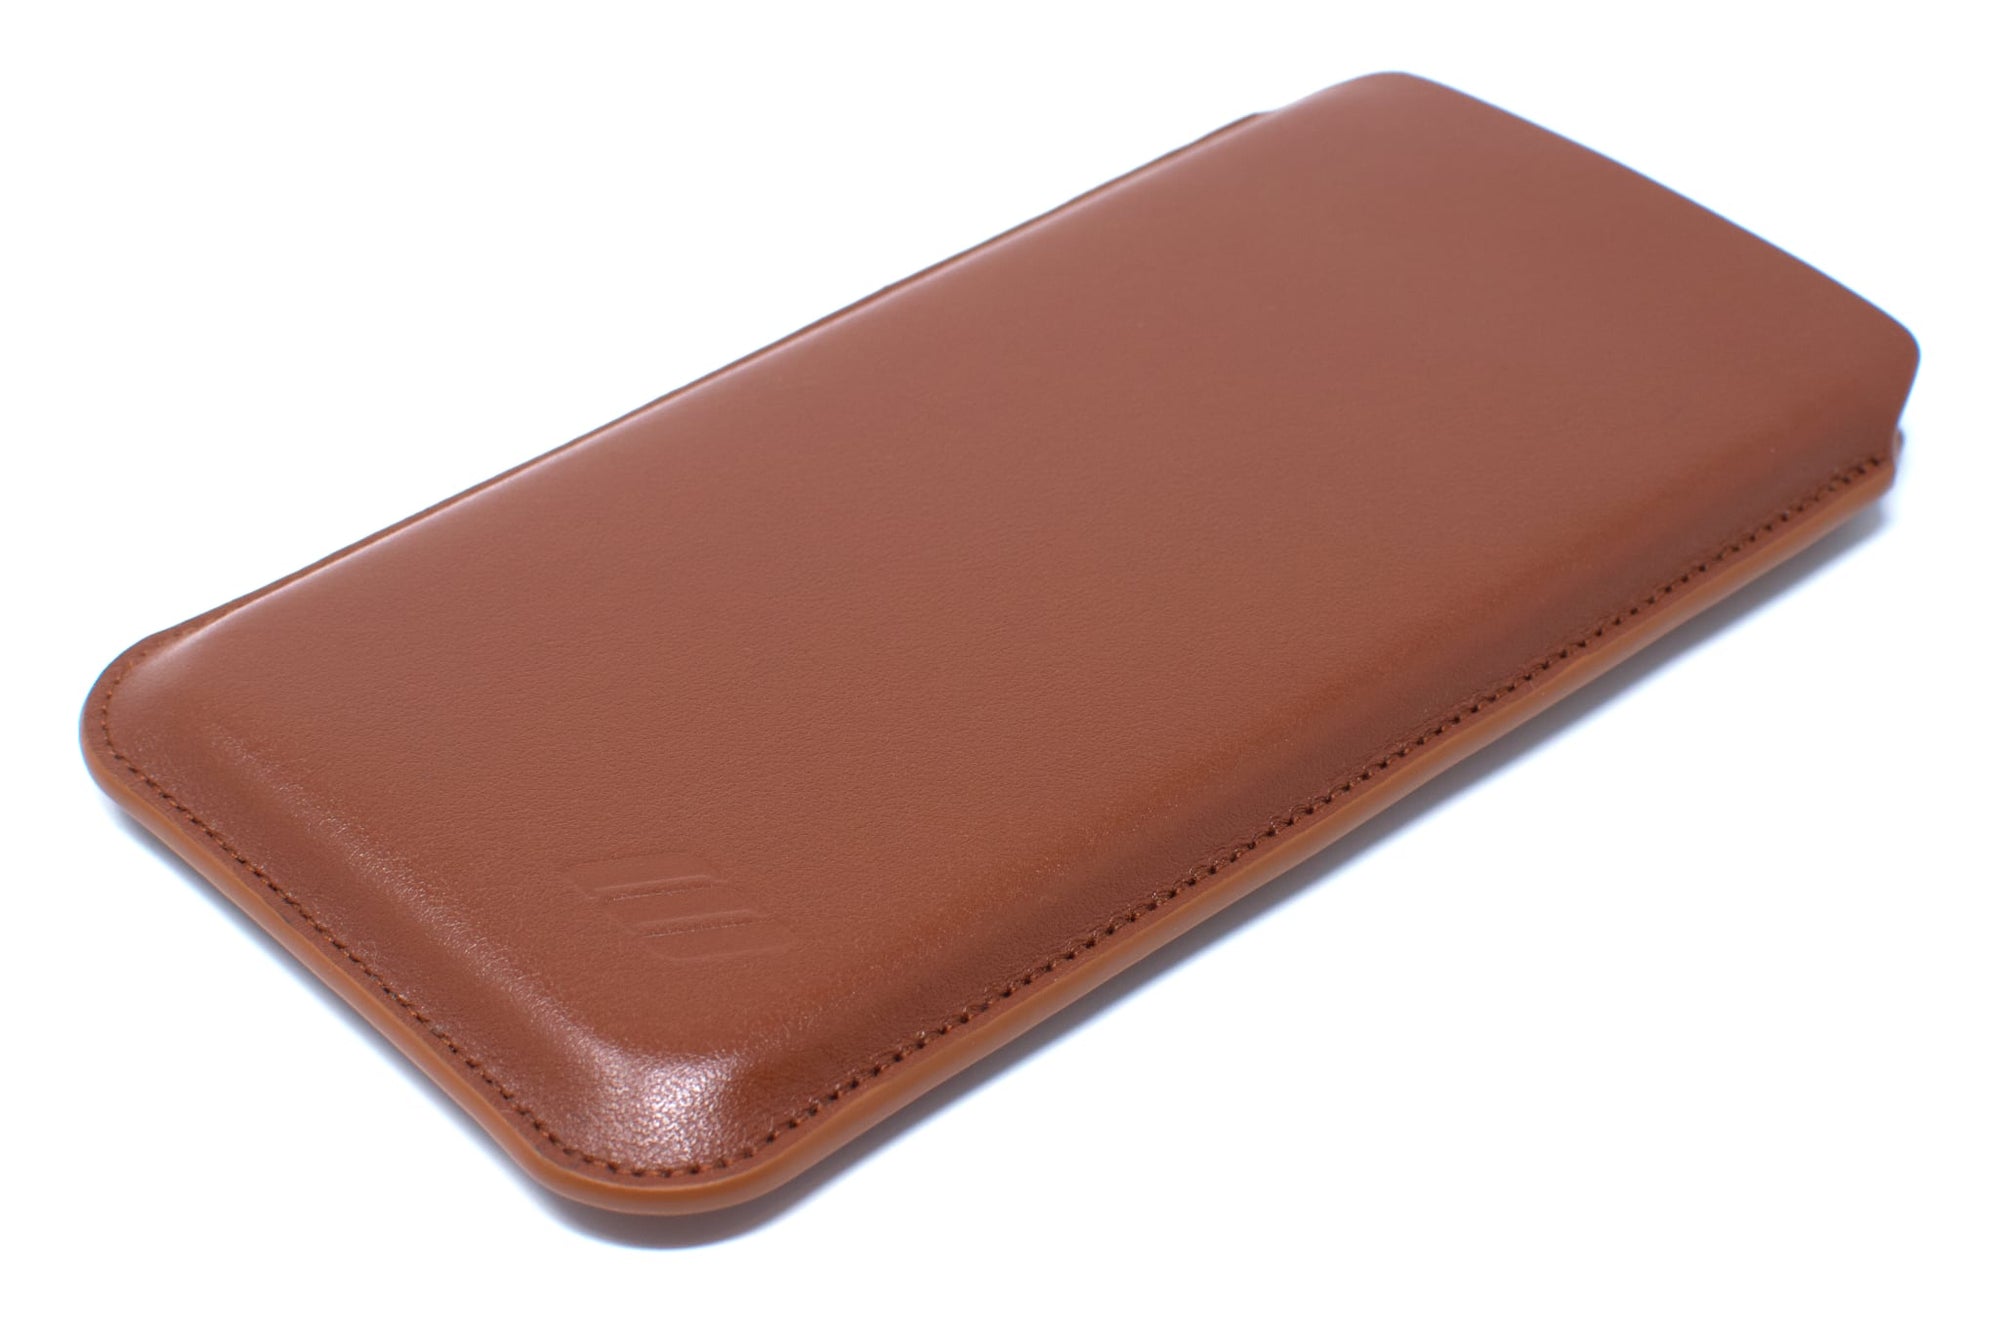 Apple iPhone 13 Pro Max Leather Sleeve Case - Skinny Fit - Acorn Brown